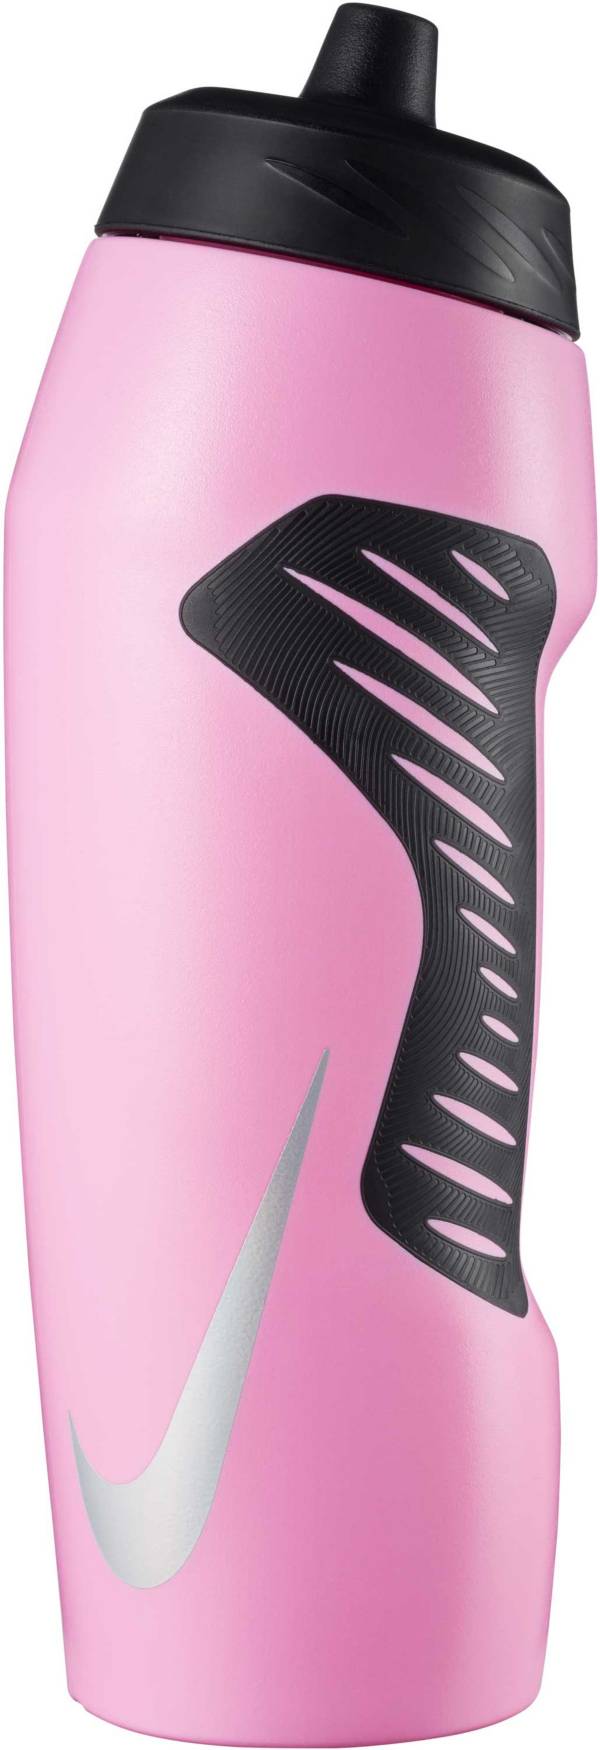 Nike Hyperfuel 32 oz. Squeeze Water Bottle product image